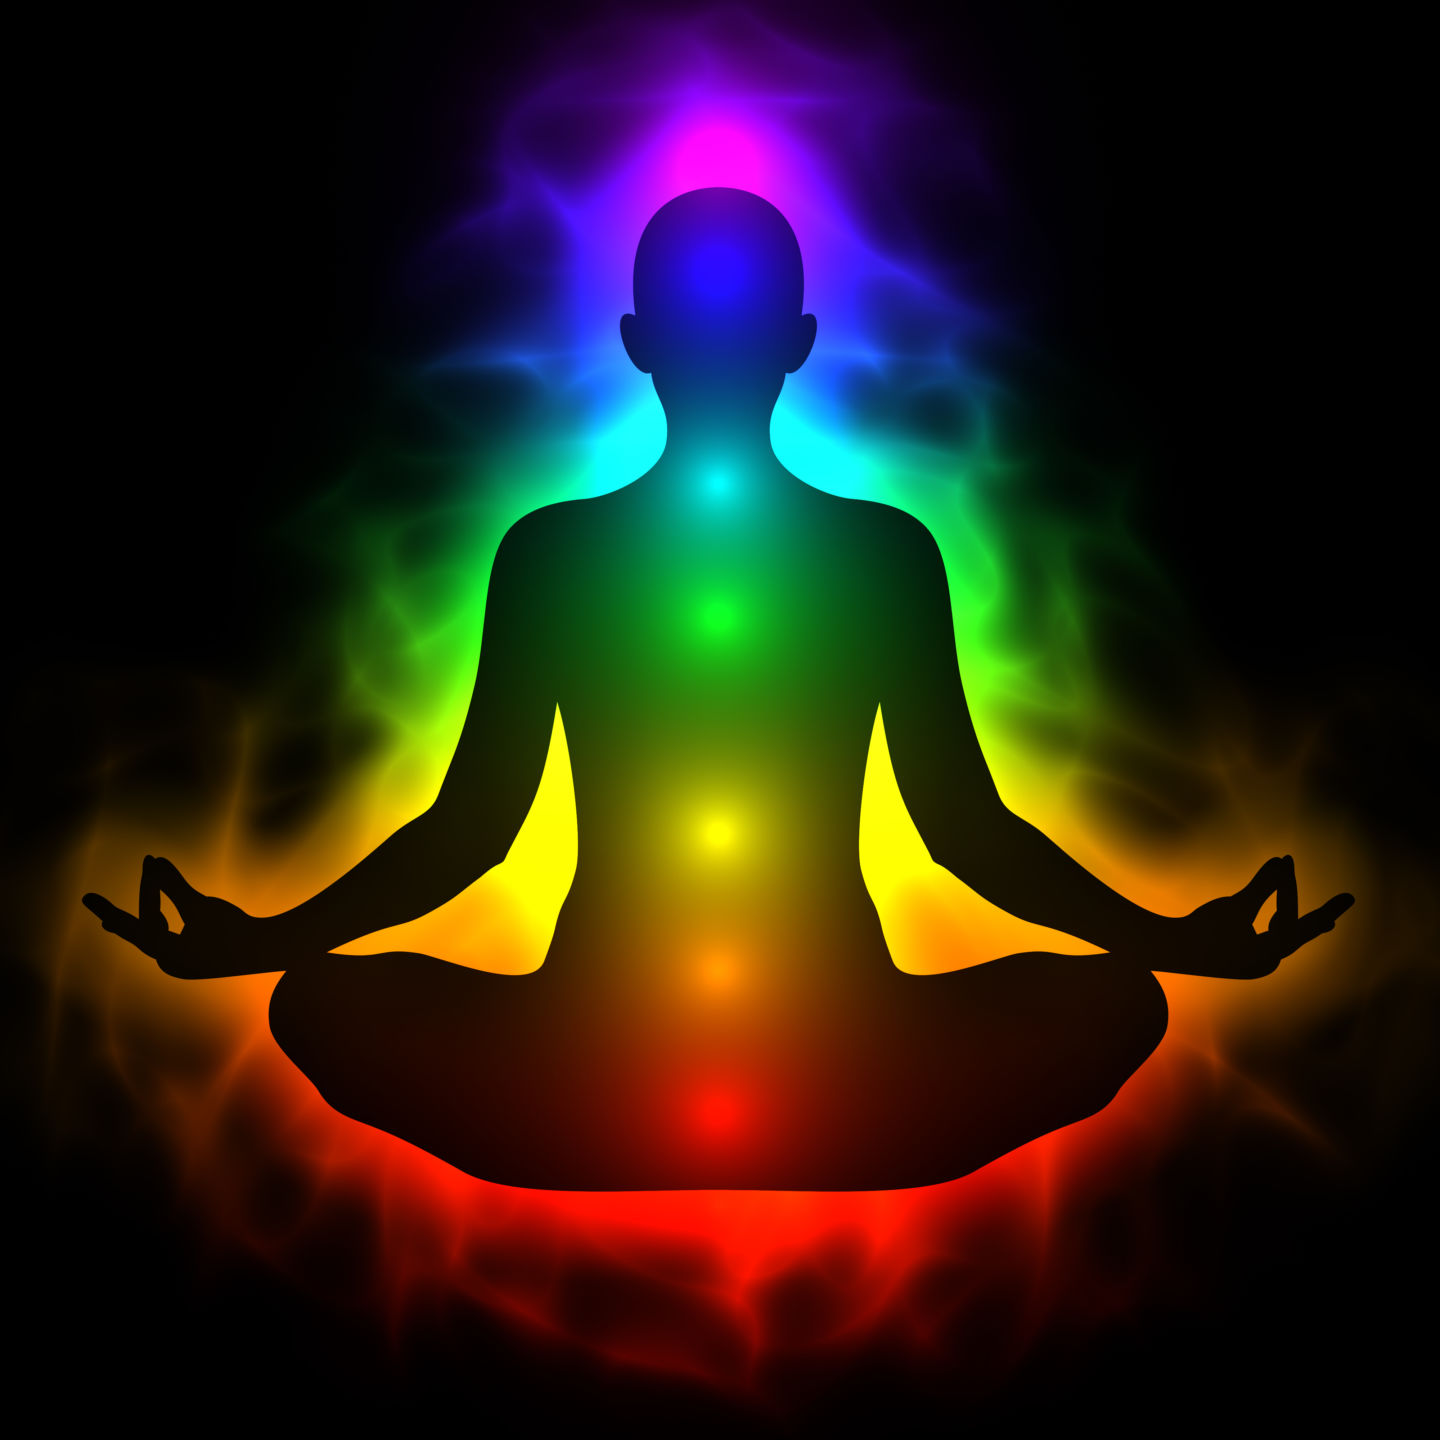 Illustration of human energy body with aura and chakras in meditation